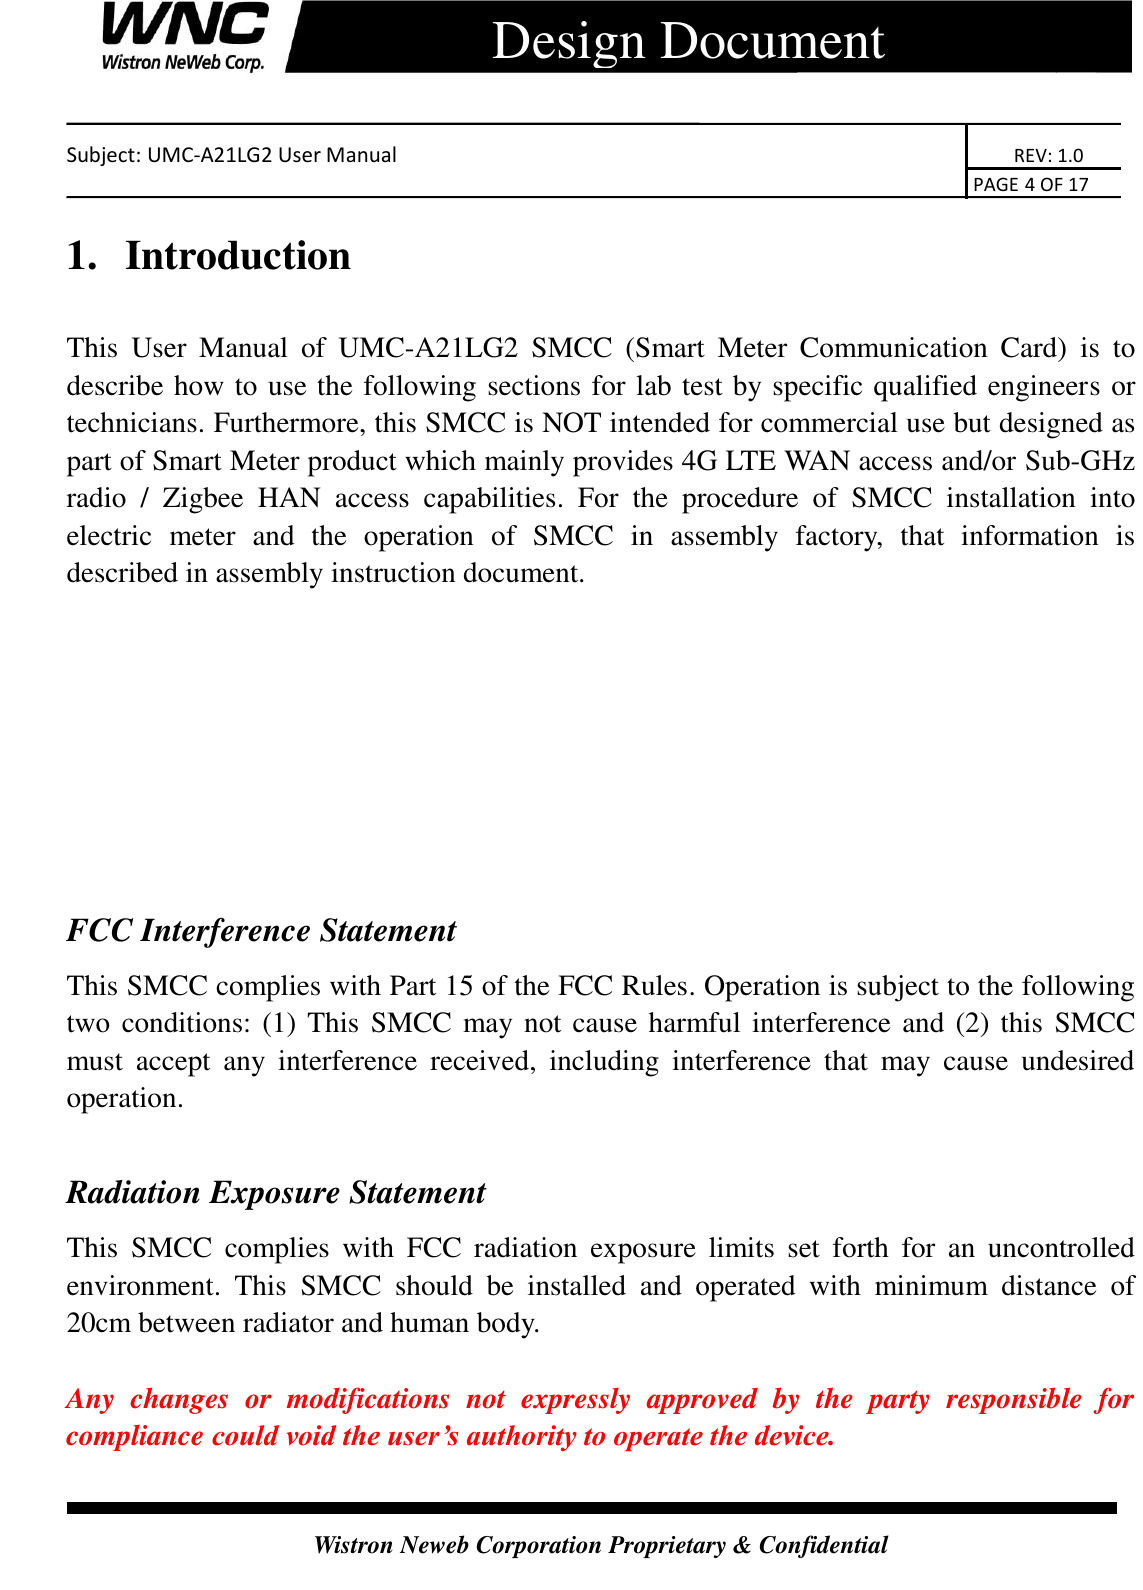    Subject: UMC-A21LG2 User Manual                                                                      REV: 1.0                                                                                        PAGE 4 OF 17  Wistron Neweb Corporation Proprietary &amp; Confidential      Design Document 1.  Introduction This  User  Manual  of  UMC-A21LG2  SMCC  (Smart  Meter  Communication  Card)  is  to describe how to use the following sections for lab test by specific qualified engineers or technicians. Furthermore, this SMCC is NOT intended for commercial use but designed as part of Smart Meter product which mainly provides 4G LTE WAN access and/or Sub-GHz radio  /  Zigbee  HAN  access  capabilities.  For  the  procedure  of  SMCC  installation  into electric  meter  and  the  operation  of  SMCC  in  assembly  factory,  that  information  is described in assembly instruction document.     FCC Interference Statement This SMCC complies with Part 15 of the FCC Rules. Operation is subject to the following two conditions: (1) This SMCC may not cause harmful interference and (2) this  SMCC must  accept  any  interference  received,  including  interference  that  may  cause  undesired operation.  Radiation Exposure Statement This  SMCC  complies  with  FCC  radiation  exposure  limits  set  forth  for  an  uncontrolled environment.  This  SMCC  should  be  installed  and  operated  with  minimum  distance  of 20cm between radiator and human body.  Any  changes  or  modifications  not  expressly  approved  by  the  party  responsible  for compliance could void the user’s authority to operate the device. 